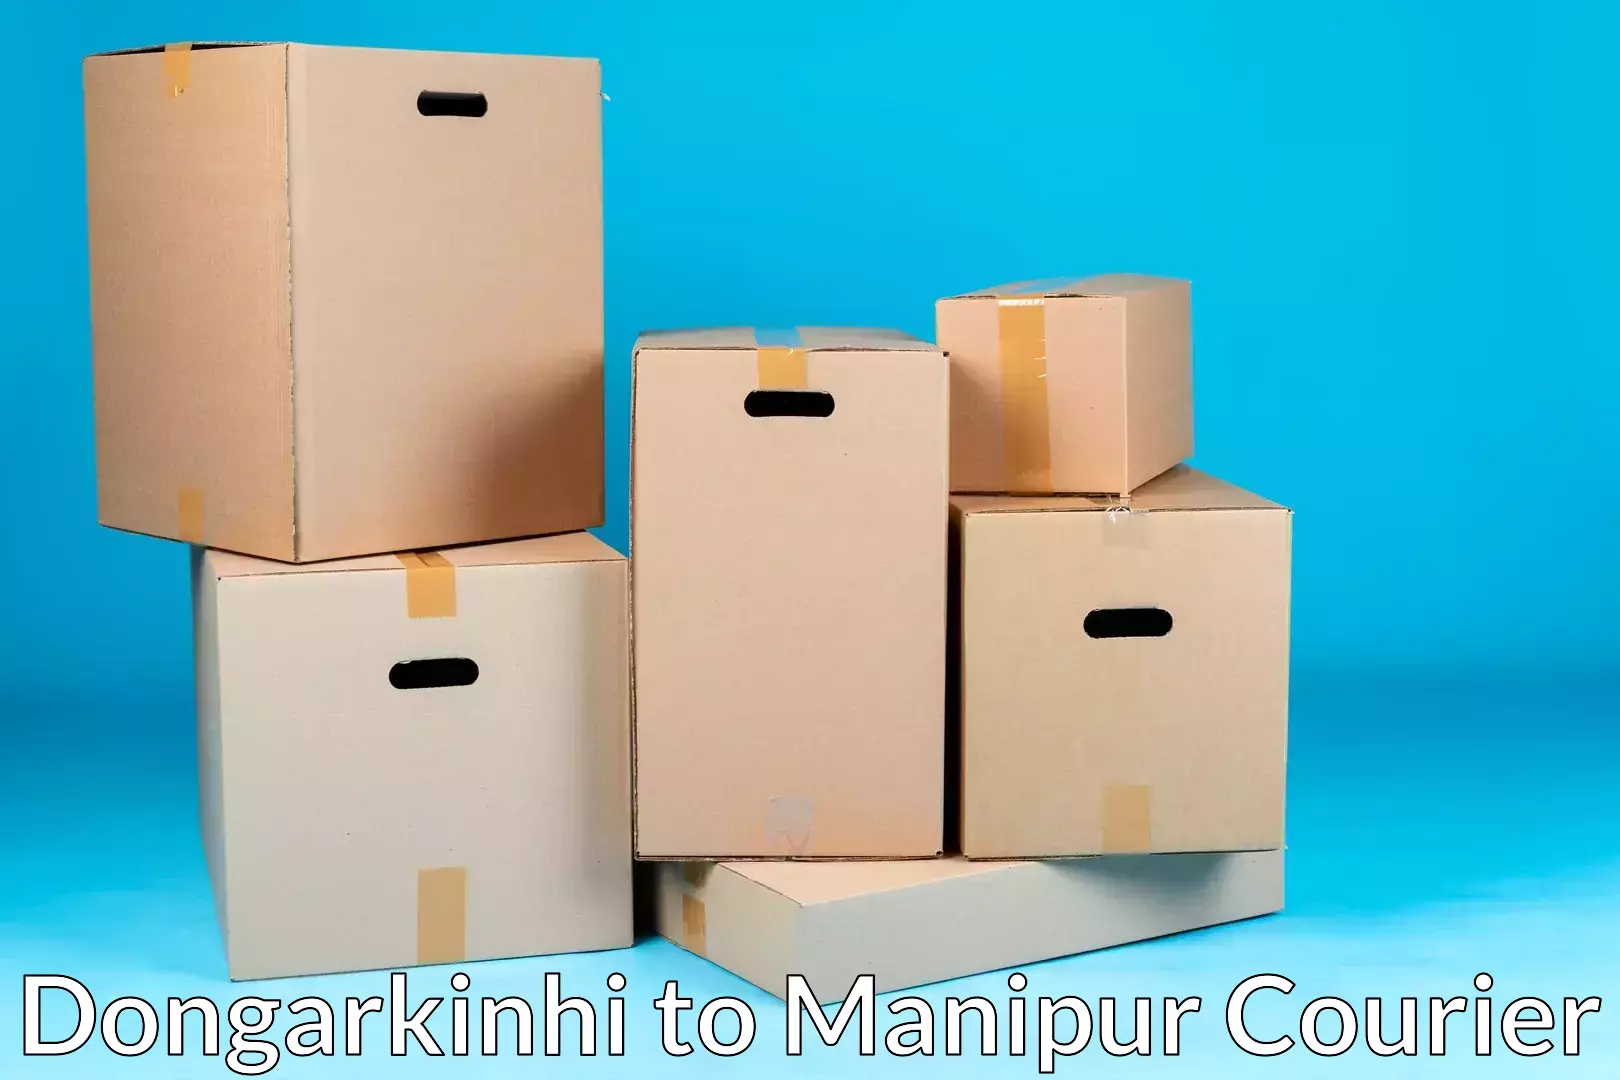 Furniture relocation services in Dongarkinhi to Chandel